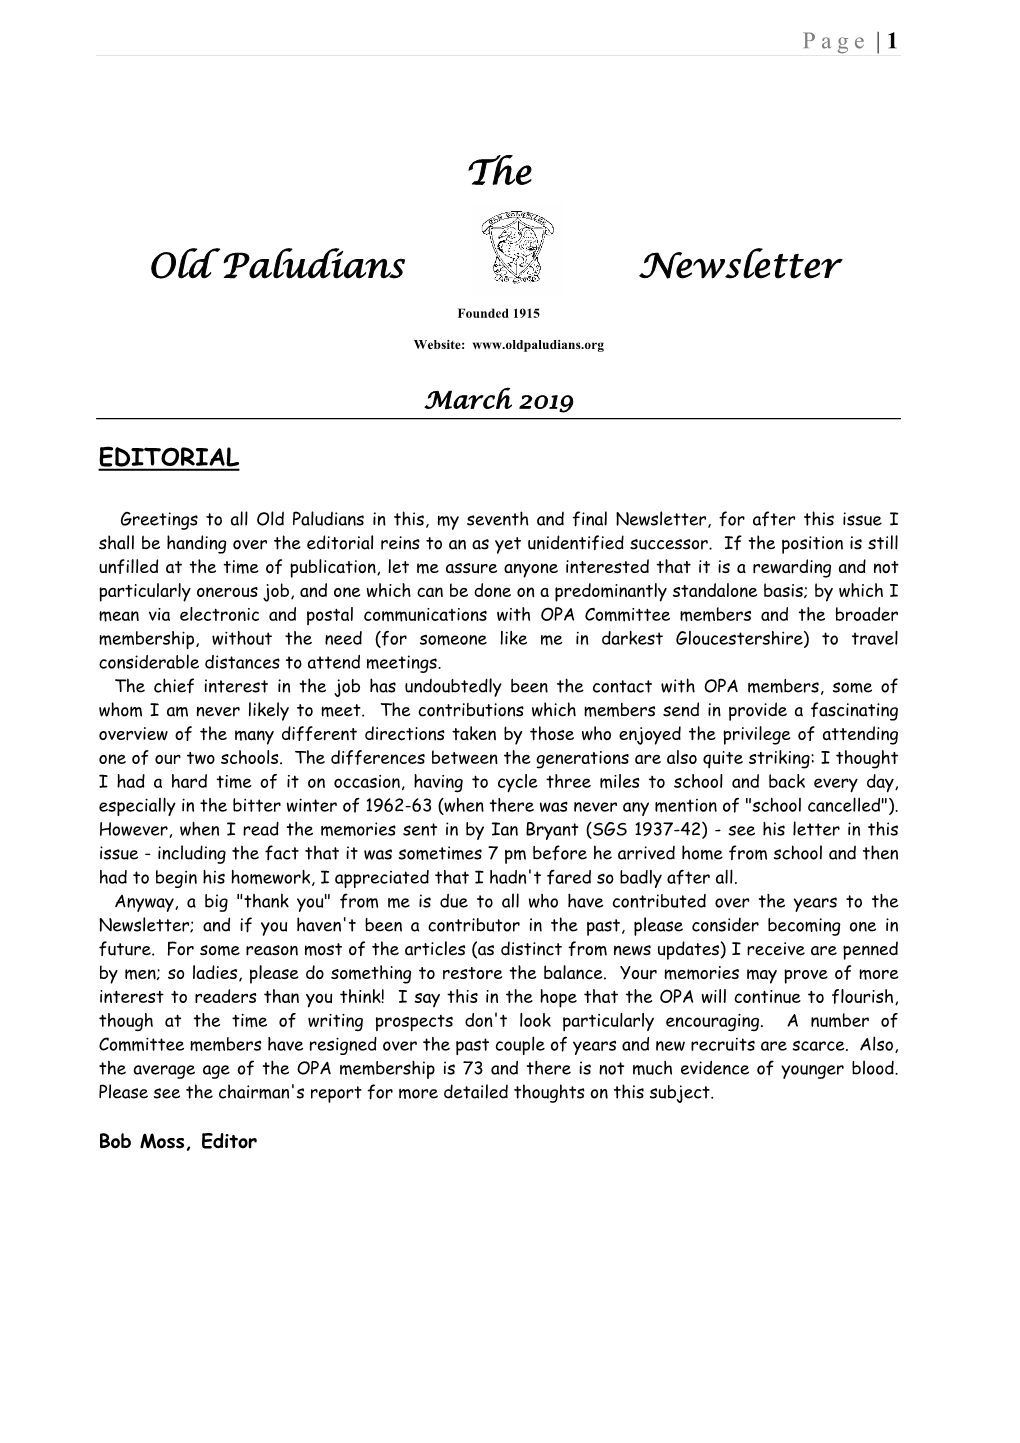 The Old Paludians Newsletter